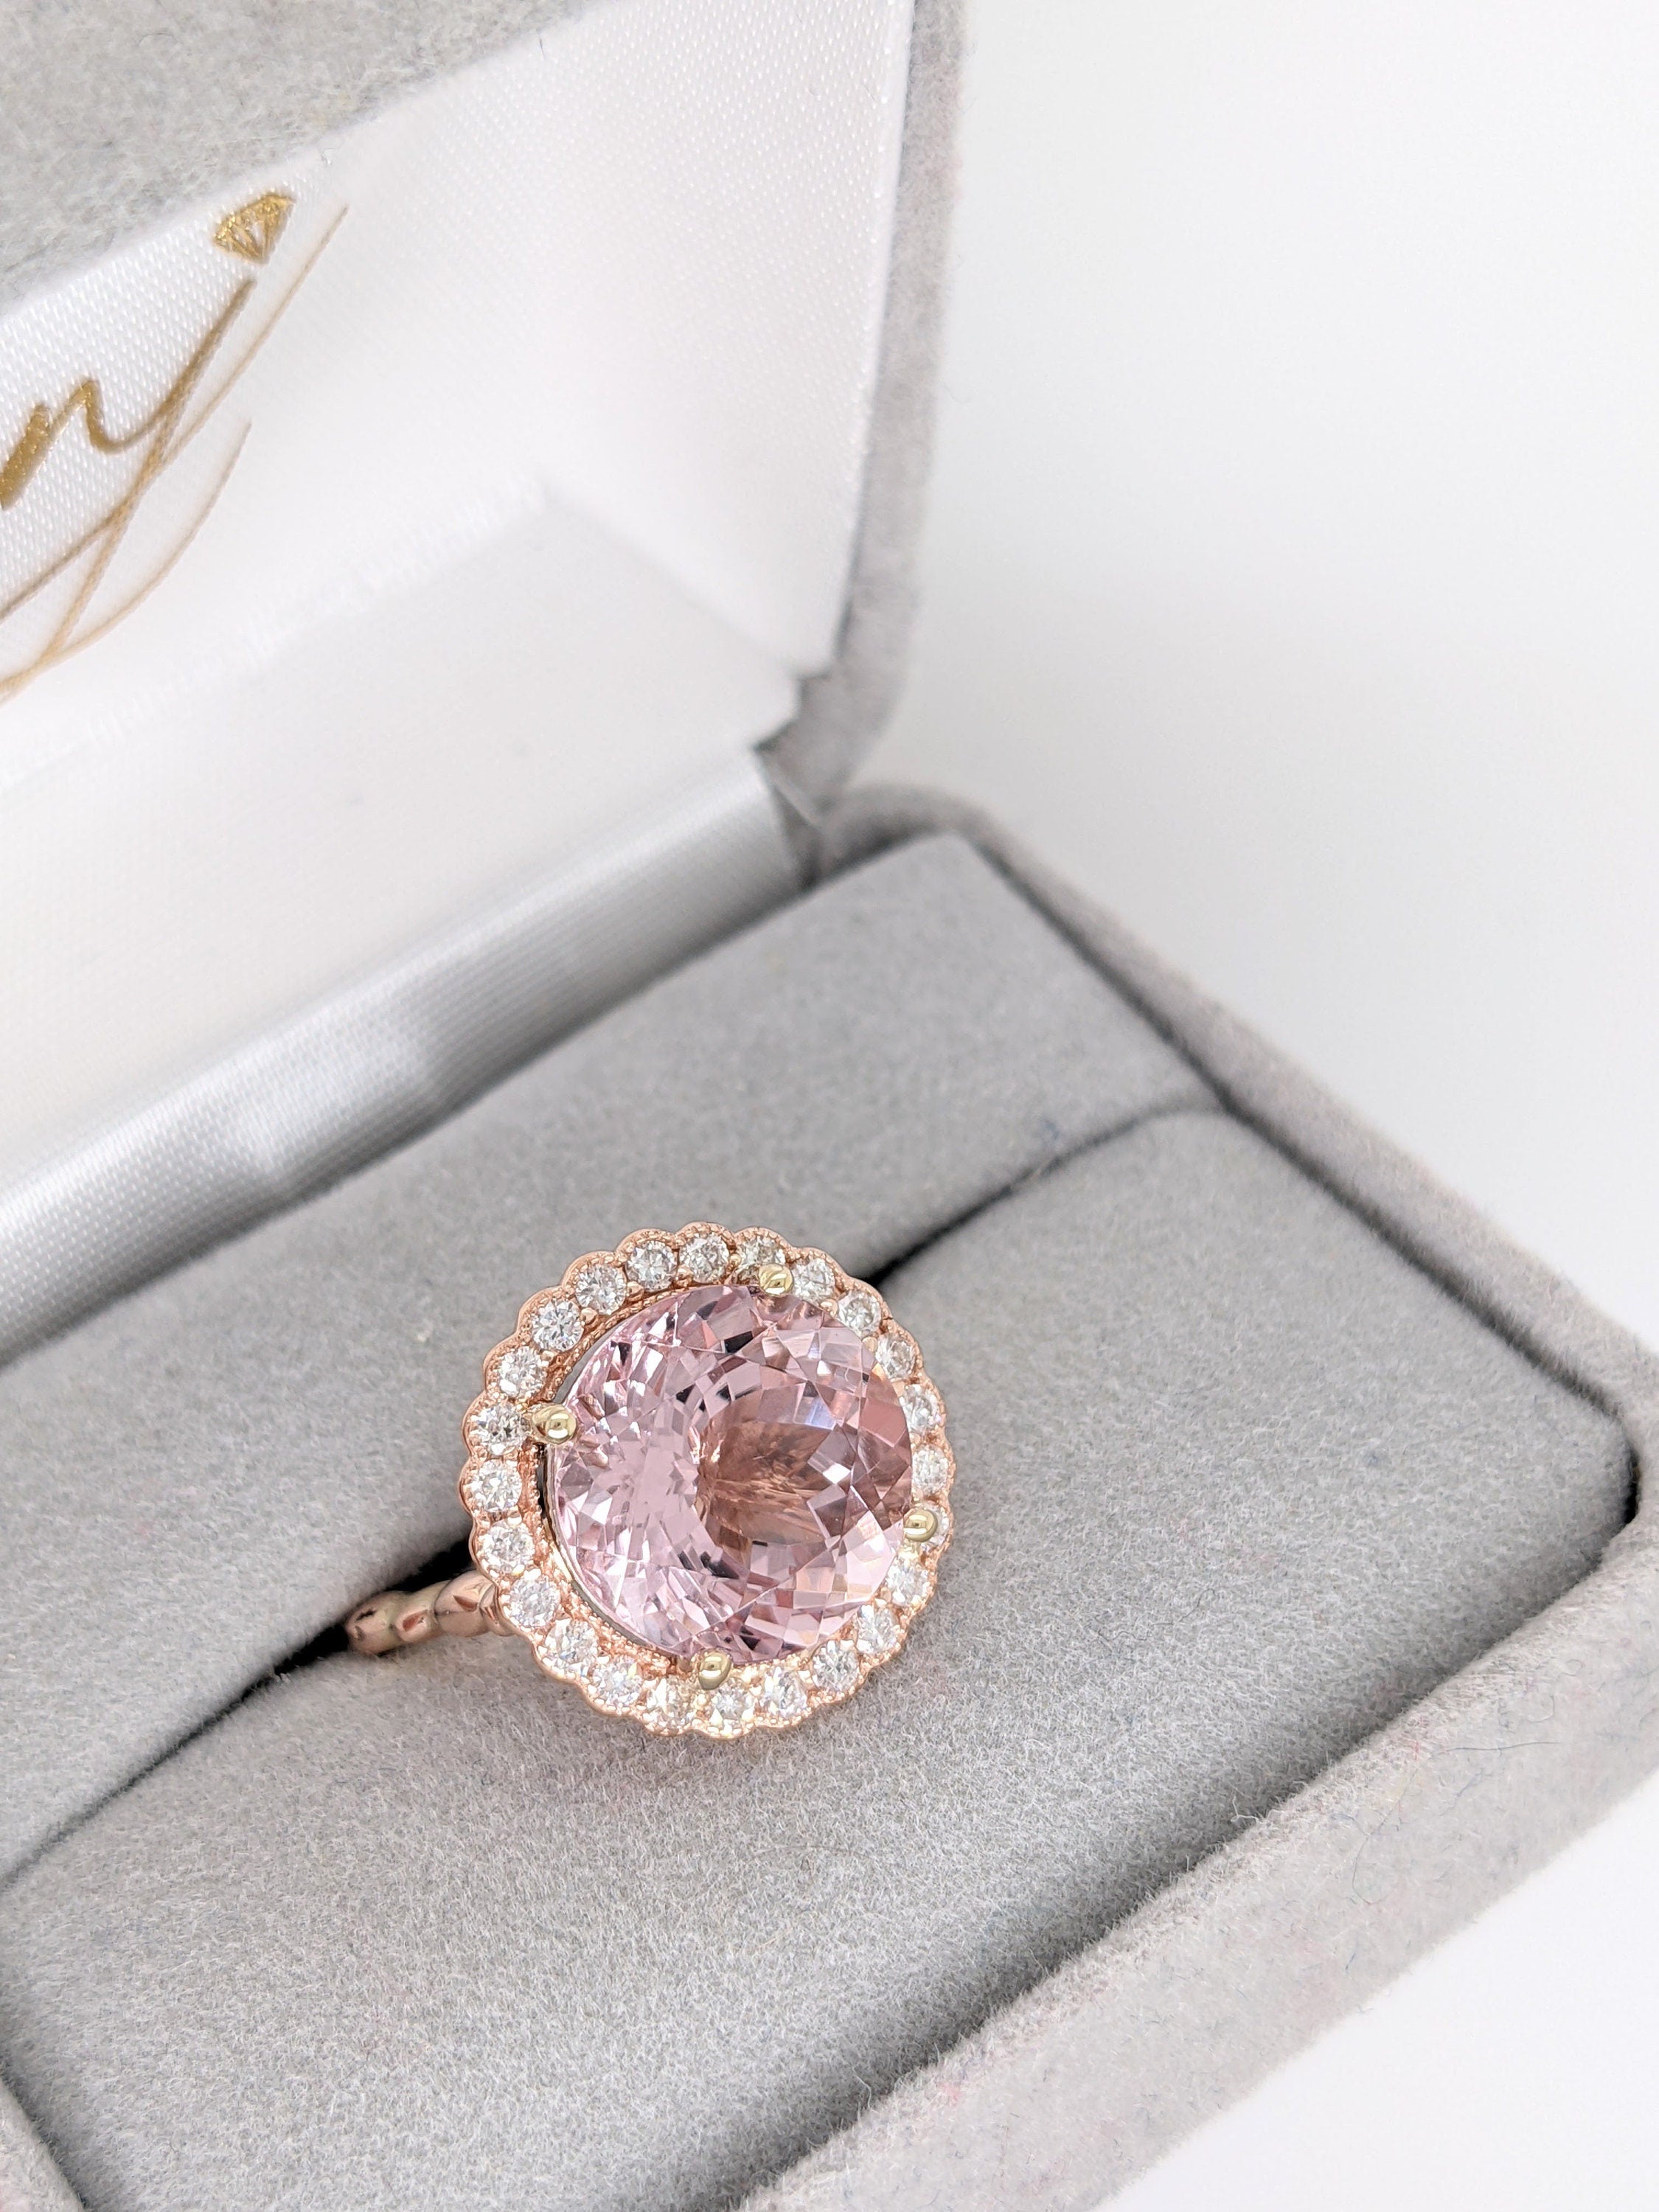 Pink Morganite Ring in Solid 14K Rose Gold w Natural Diamond Scalloped Halo | Round Cut 11mm | Prong Setting | Pink Gem | Milgrain